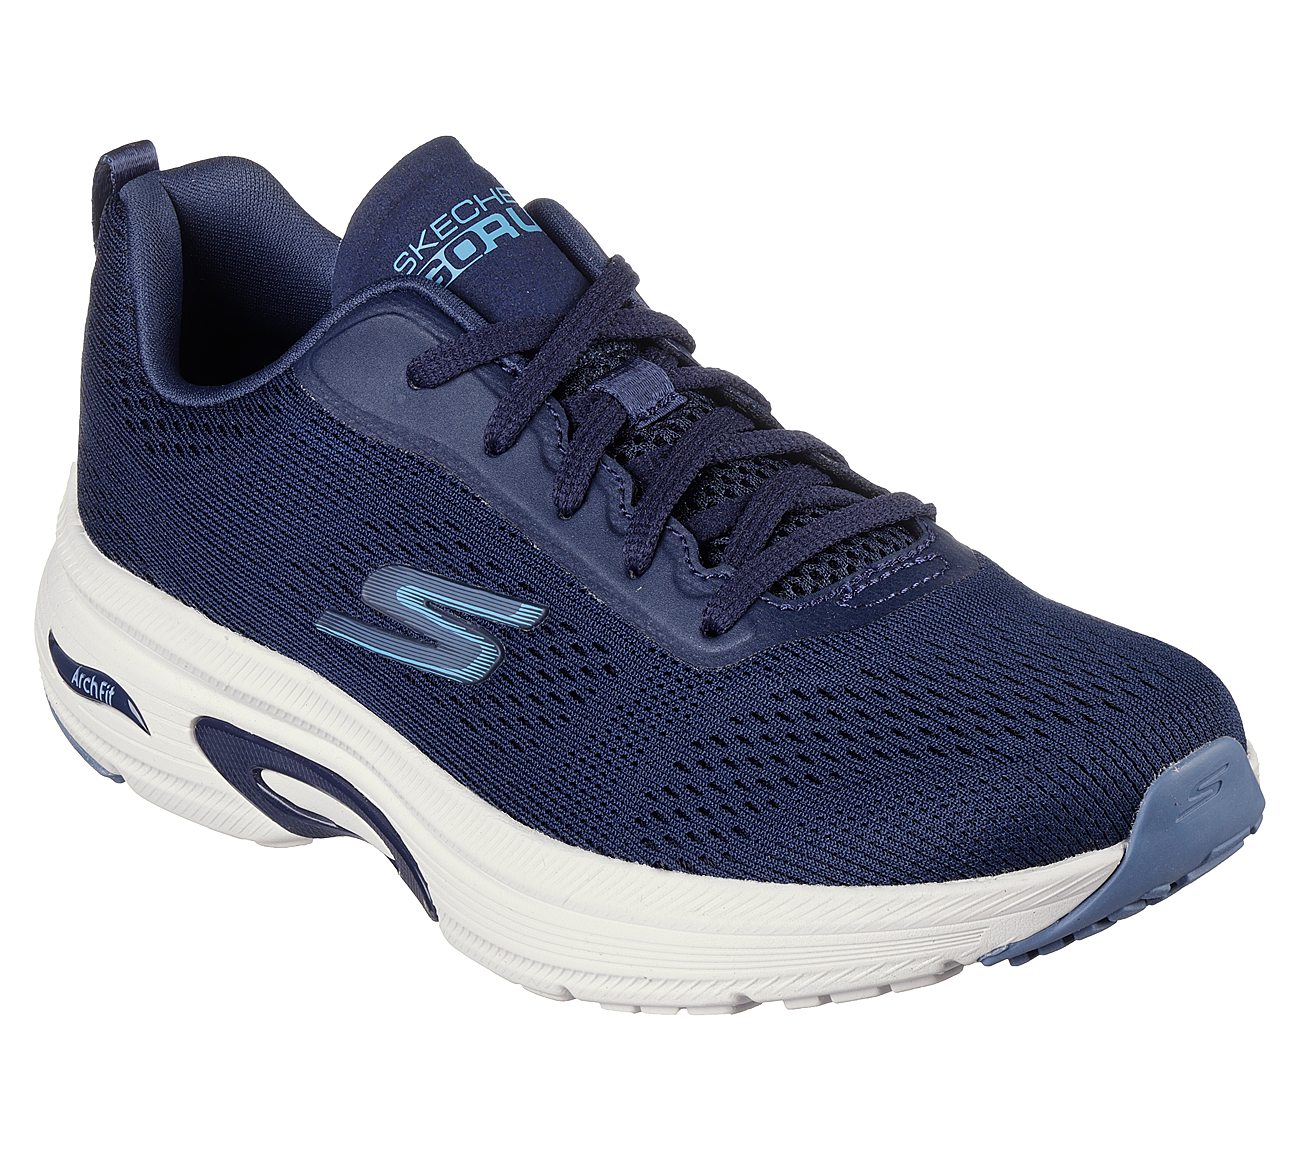 GO RUN ARCH FIT - SKYWAY, NAVY/BLUE Footwear Lateral View